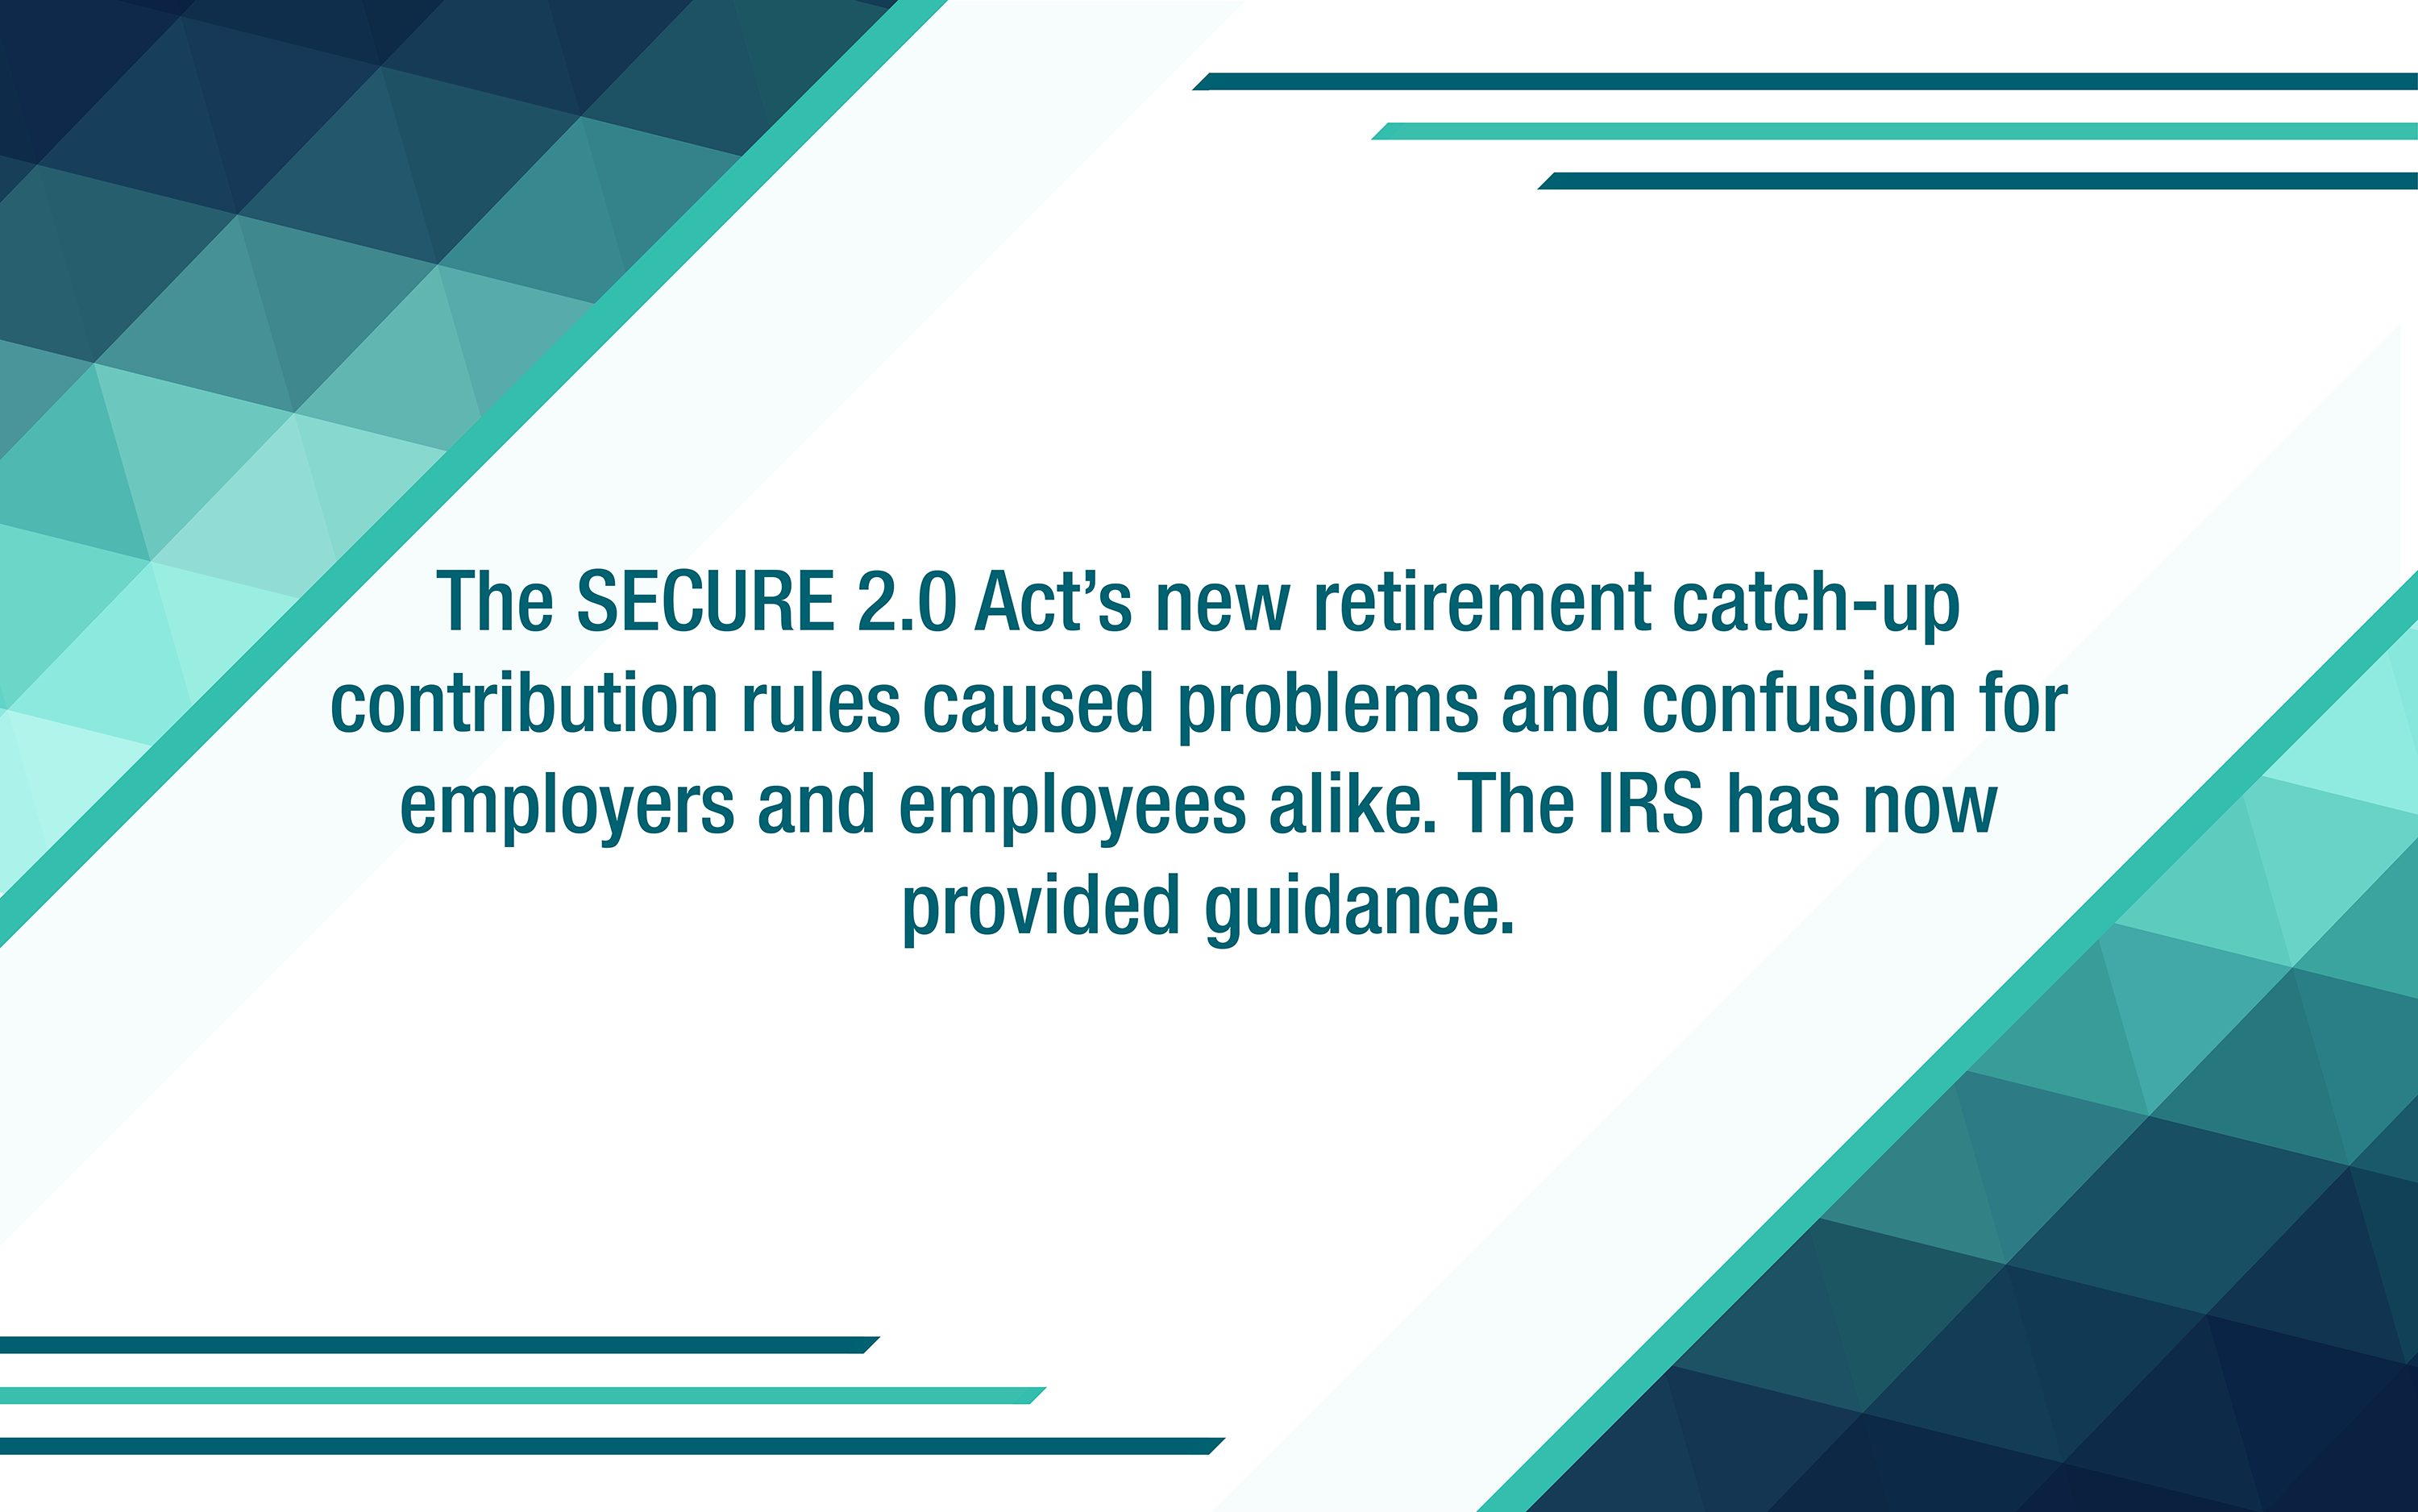 IRS issues guidance on new retirement catch-up contribution rules